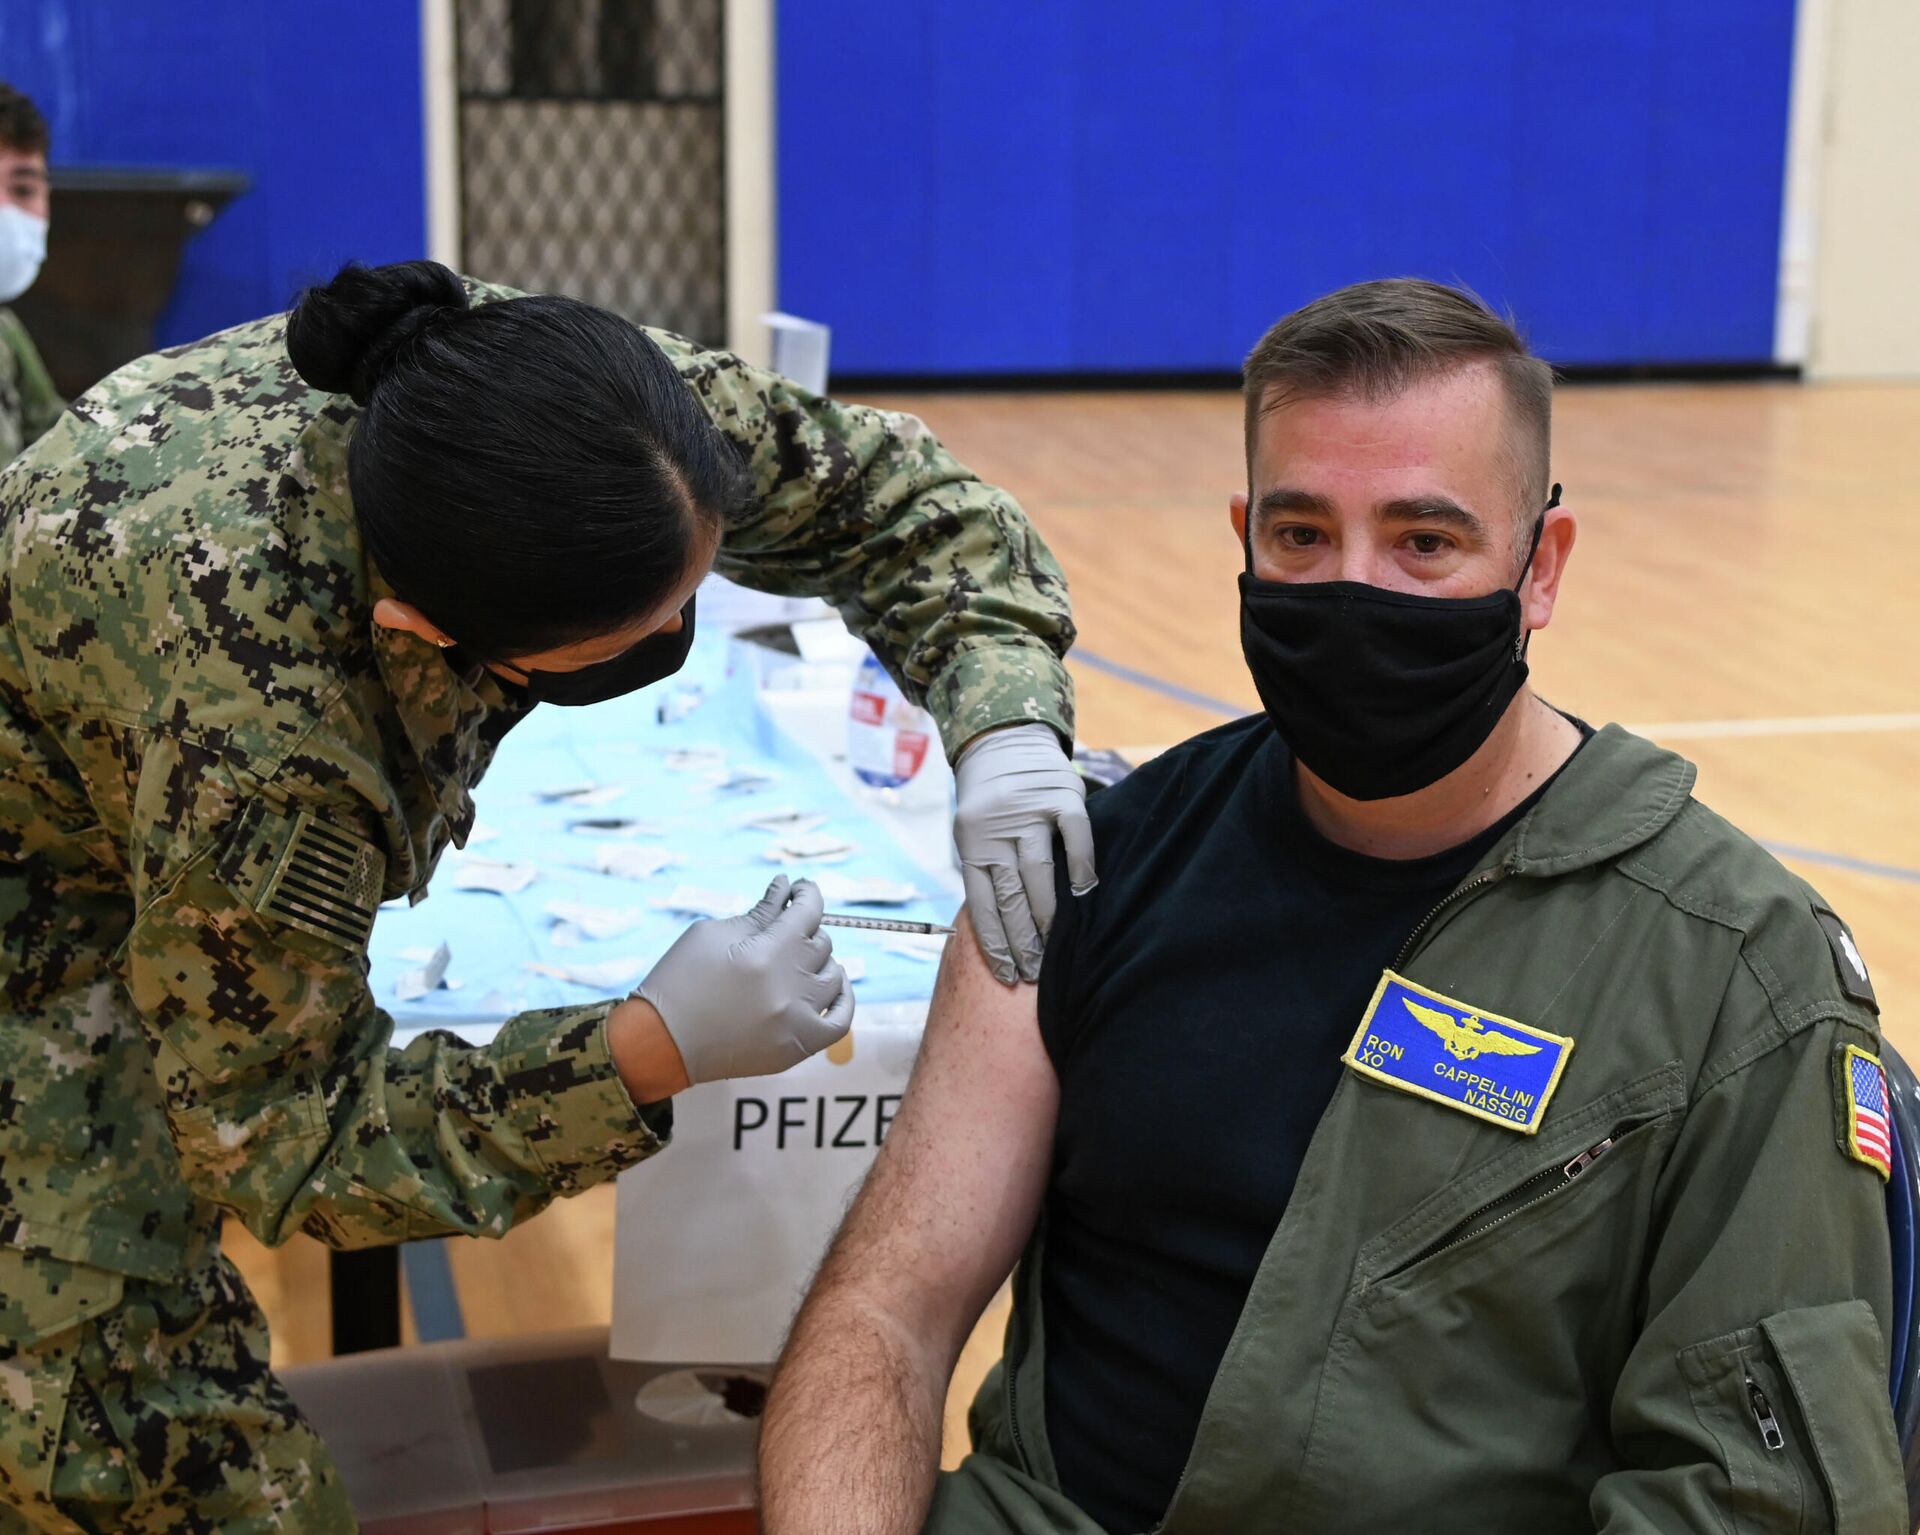 Cmdr. Ronald Cappellini, Naval Air Station Sigonella executive officer, receives his COVID-19 vaccine booster from Lt. j.g. Aracely Duerkop, during a mass-immunization exercise on Naval Air Station Sigonella, Dec. 7, 2021.  - Sputnik International, 1920, 16.12.2021